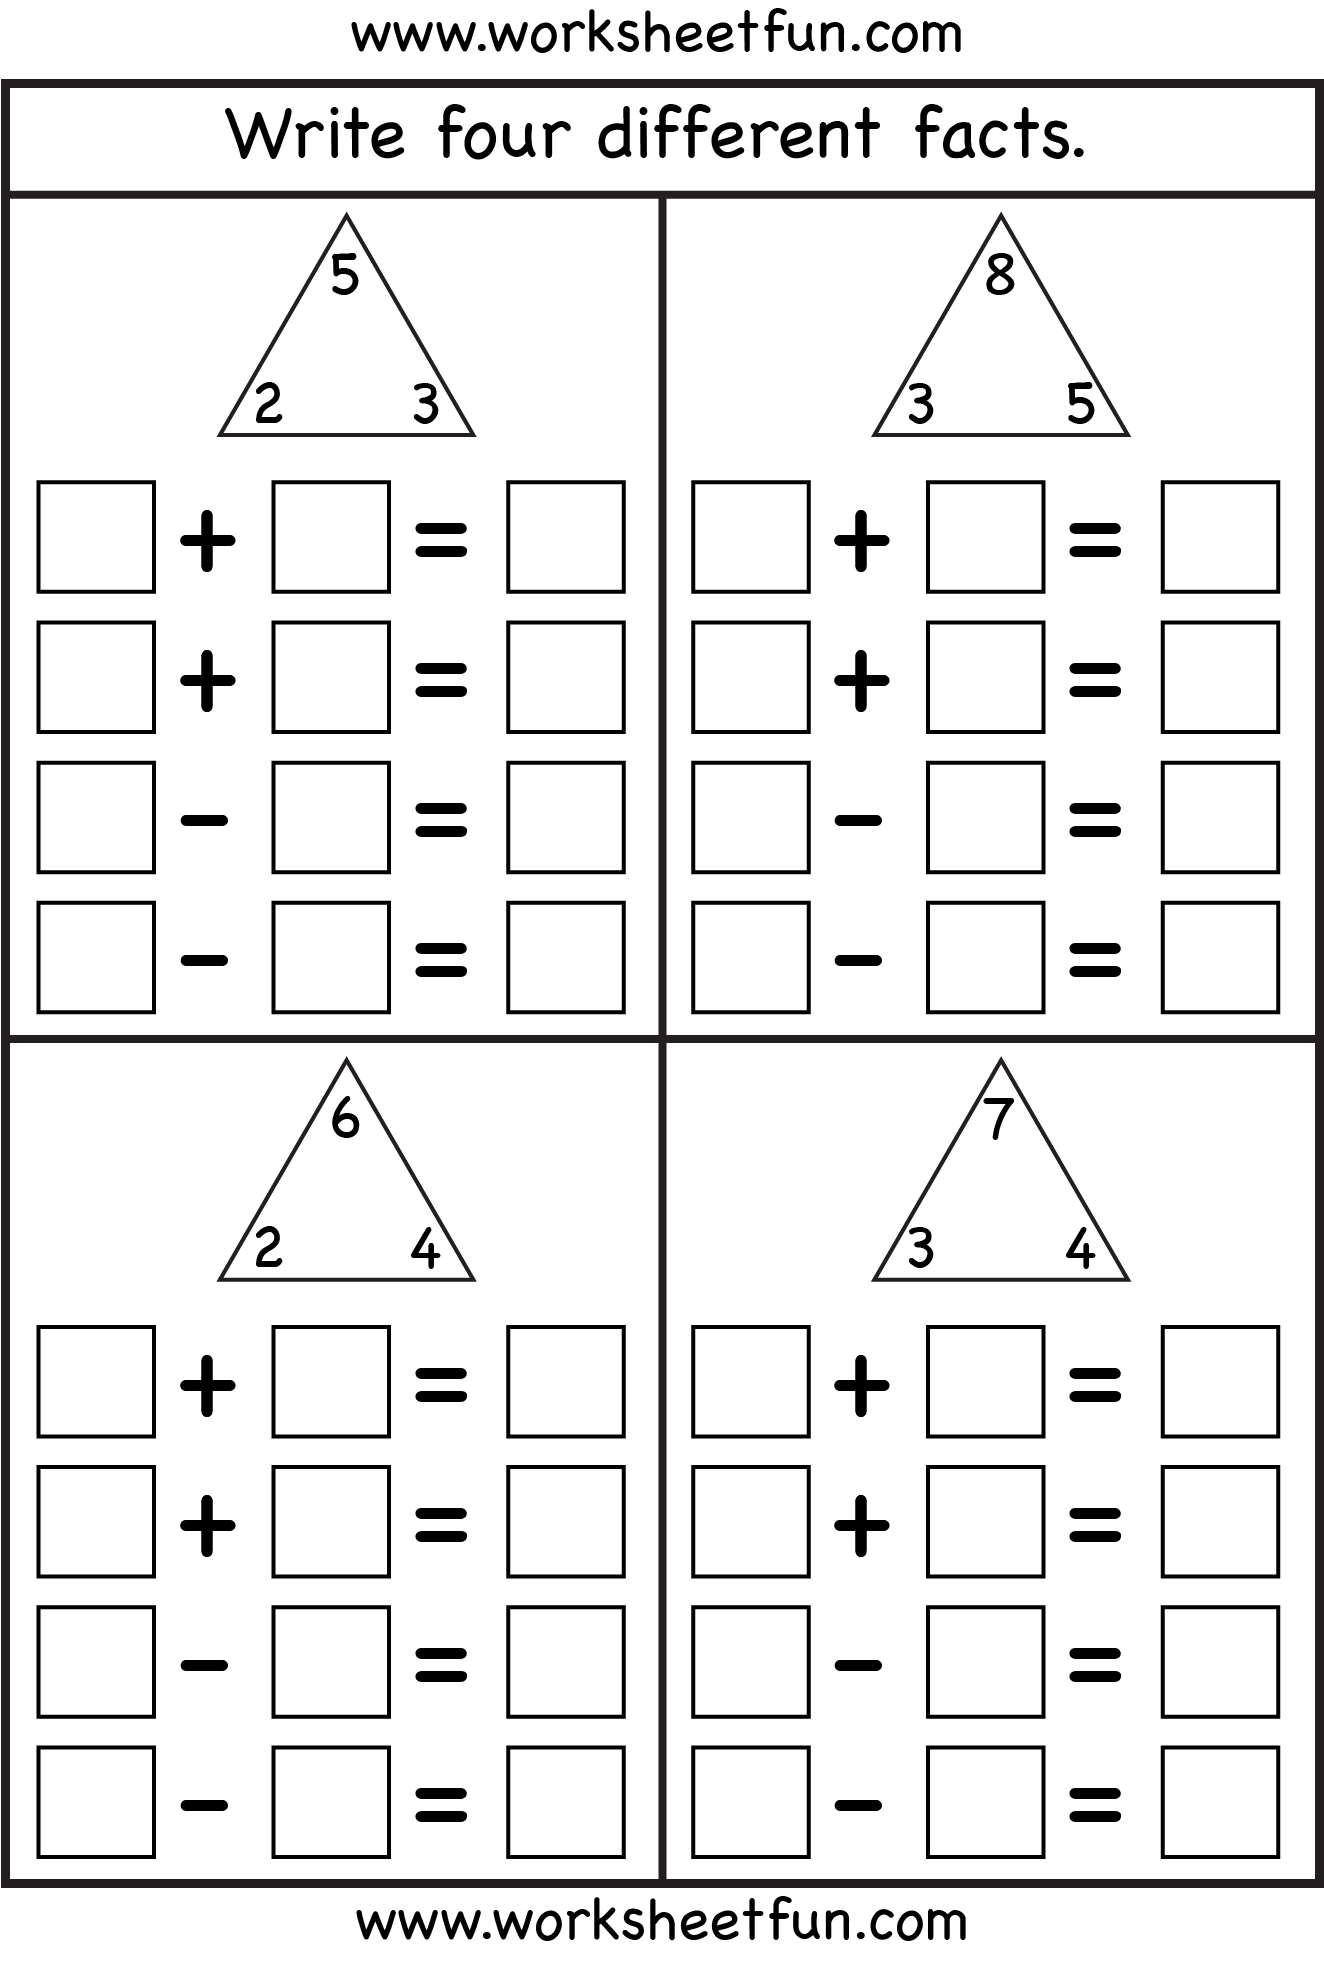 Complete Fact Family Worksheets